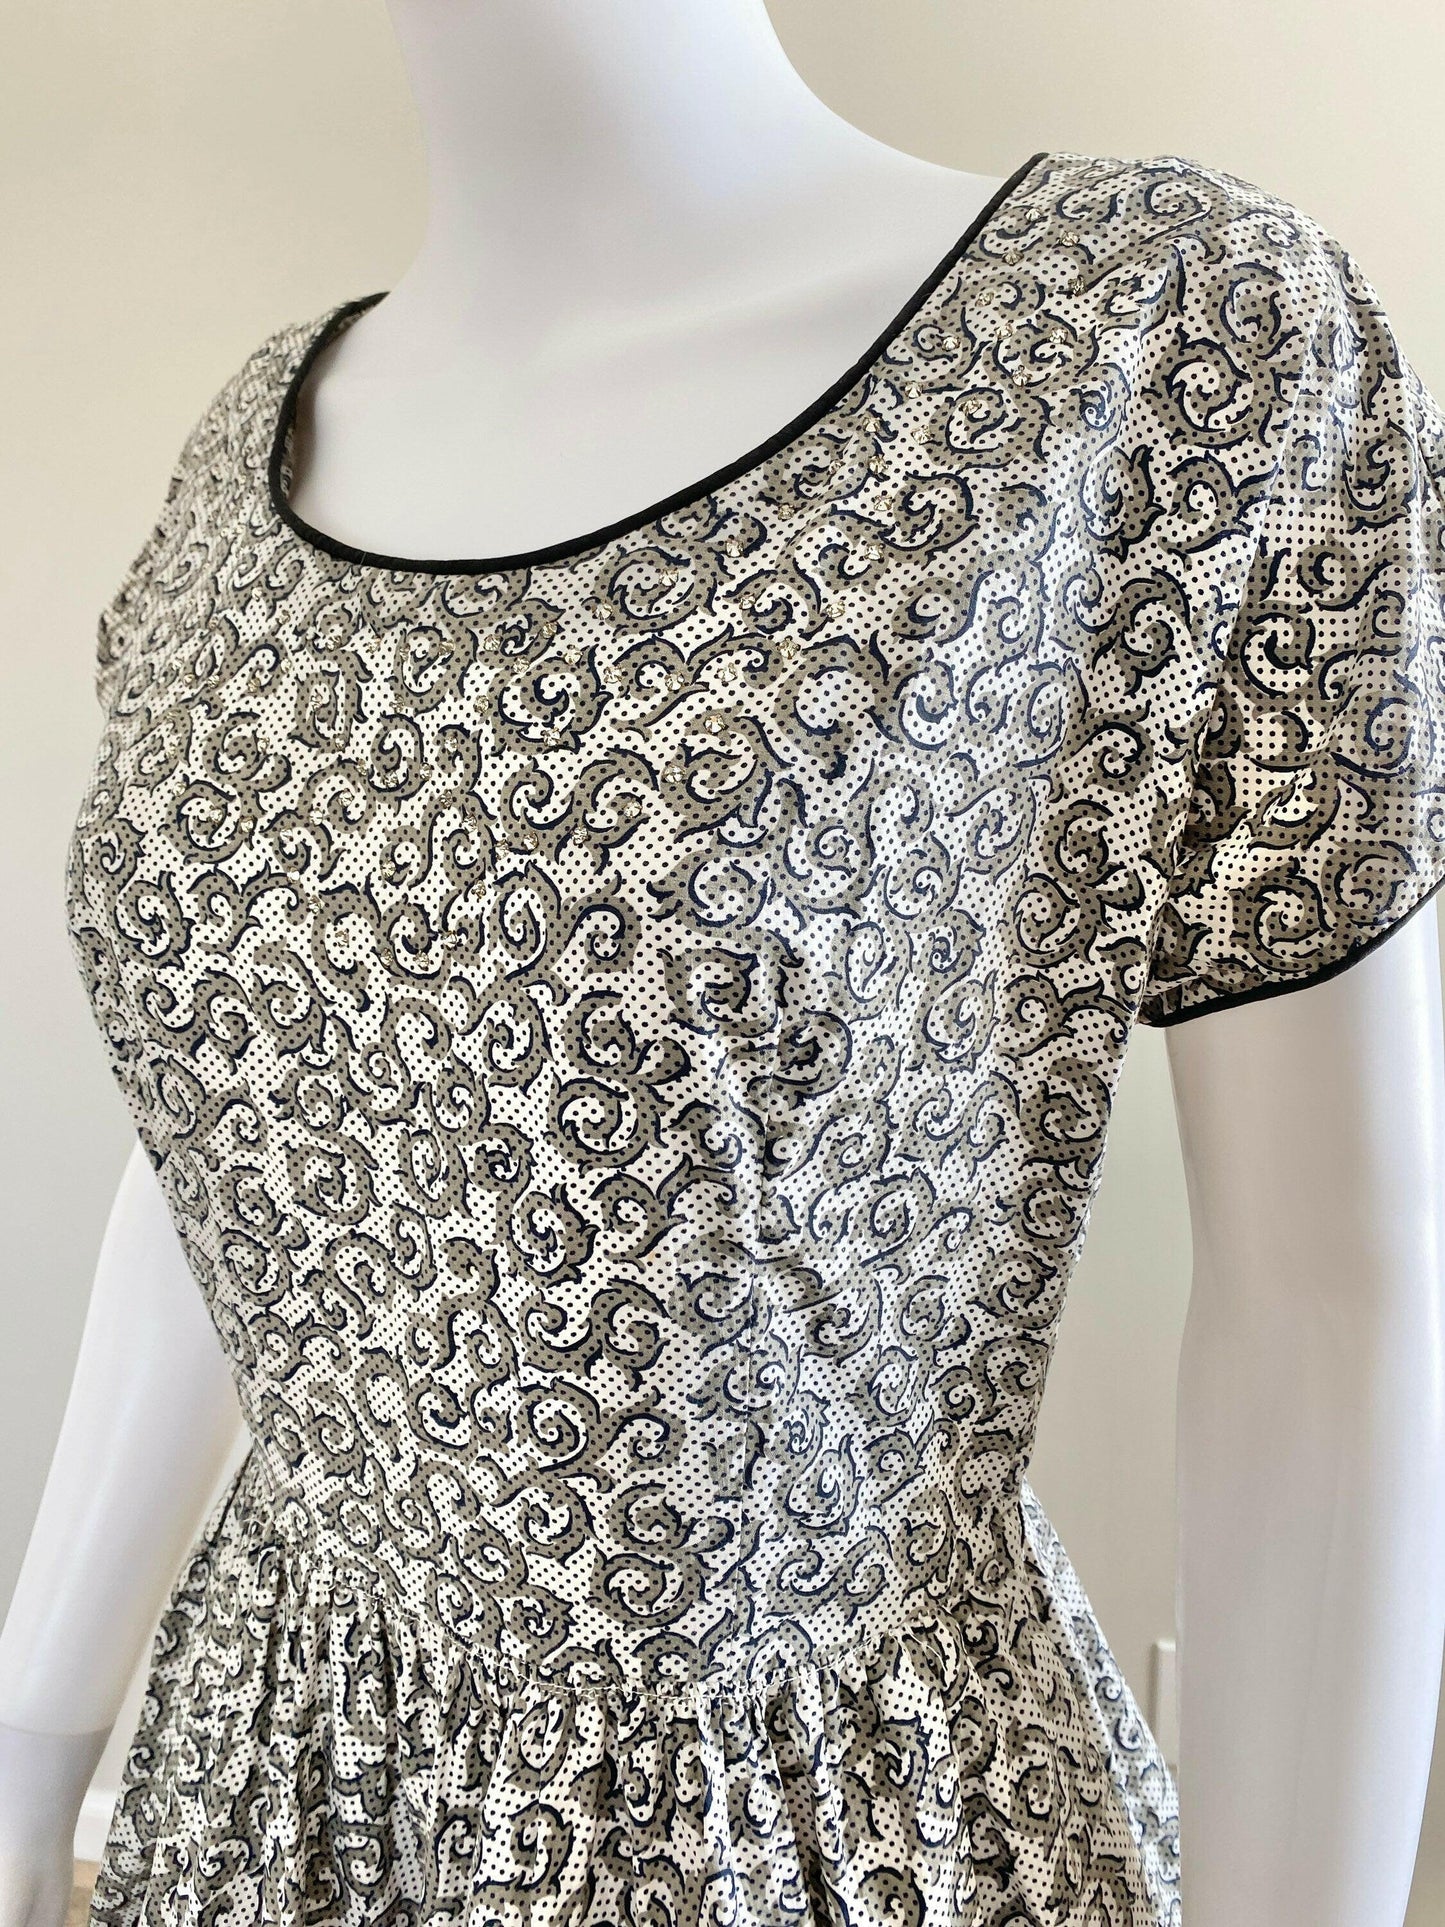 Vintage 1950s Black and White Cotton Day Dress with Rhinestones / 50s retro polka dot fit and flare casual dress with pockets / Size S